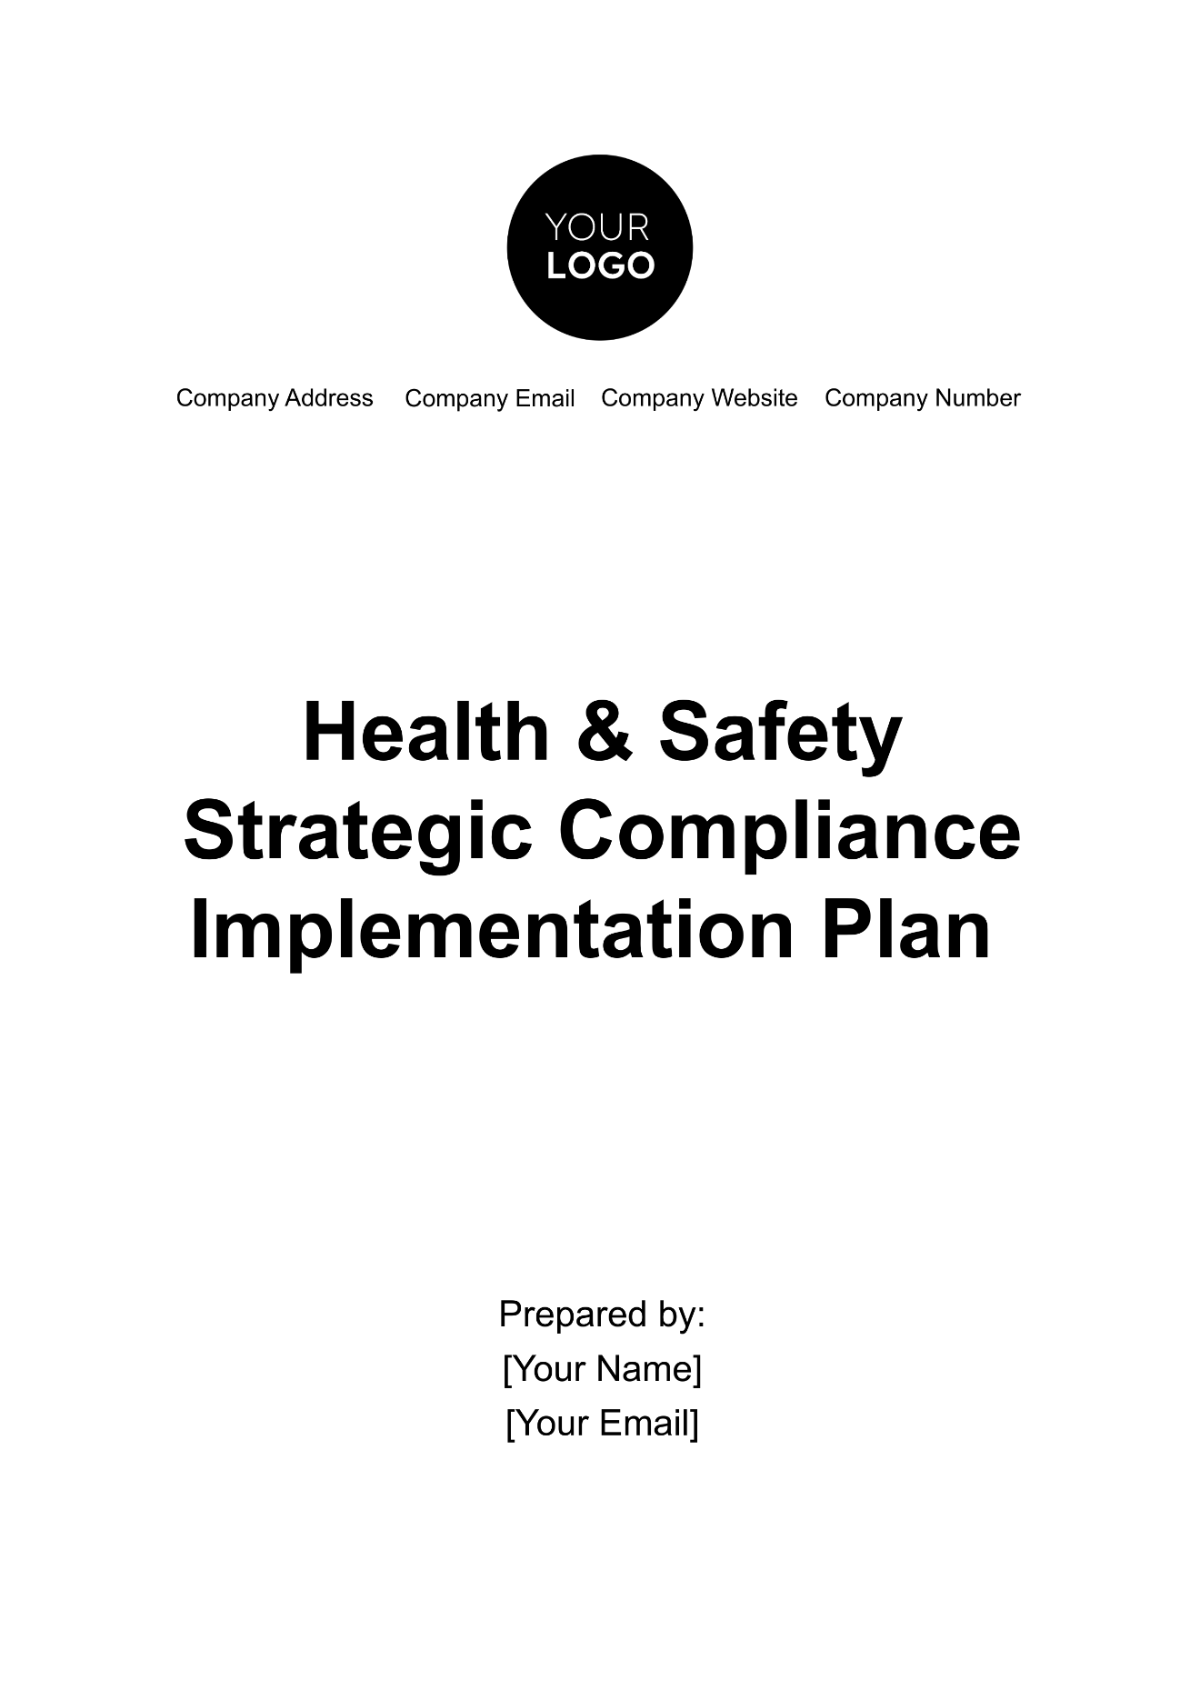 Health & Safety Strategic Compliance Implementation Plan Template